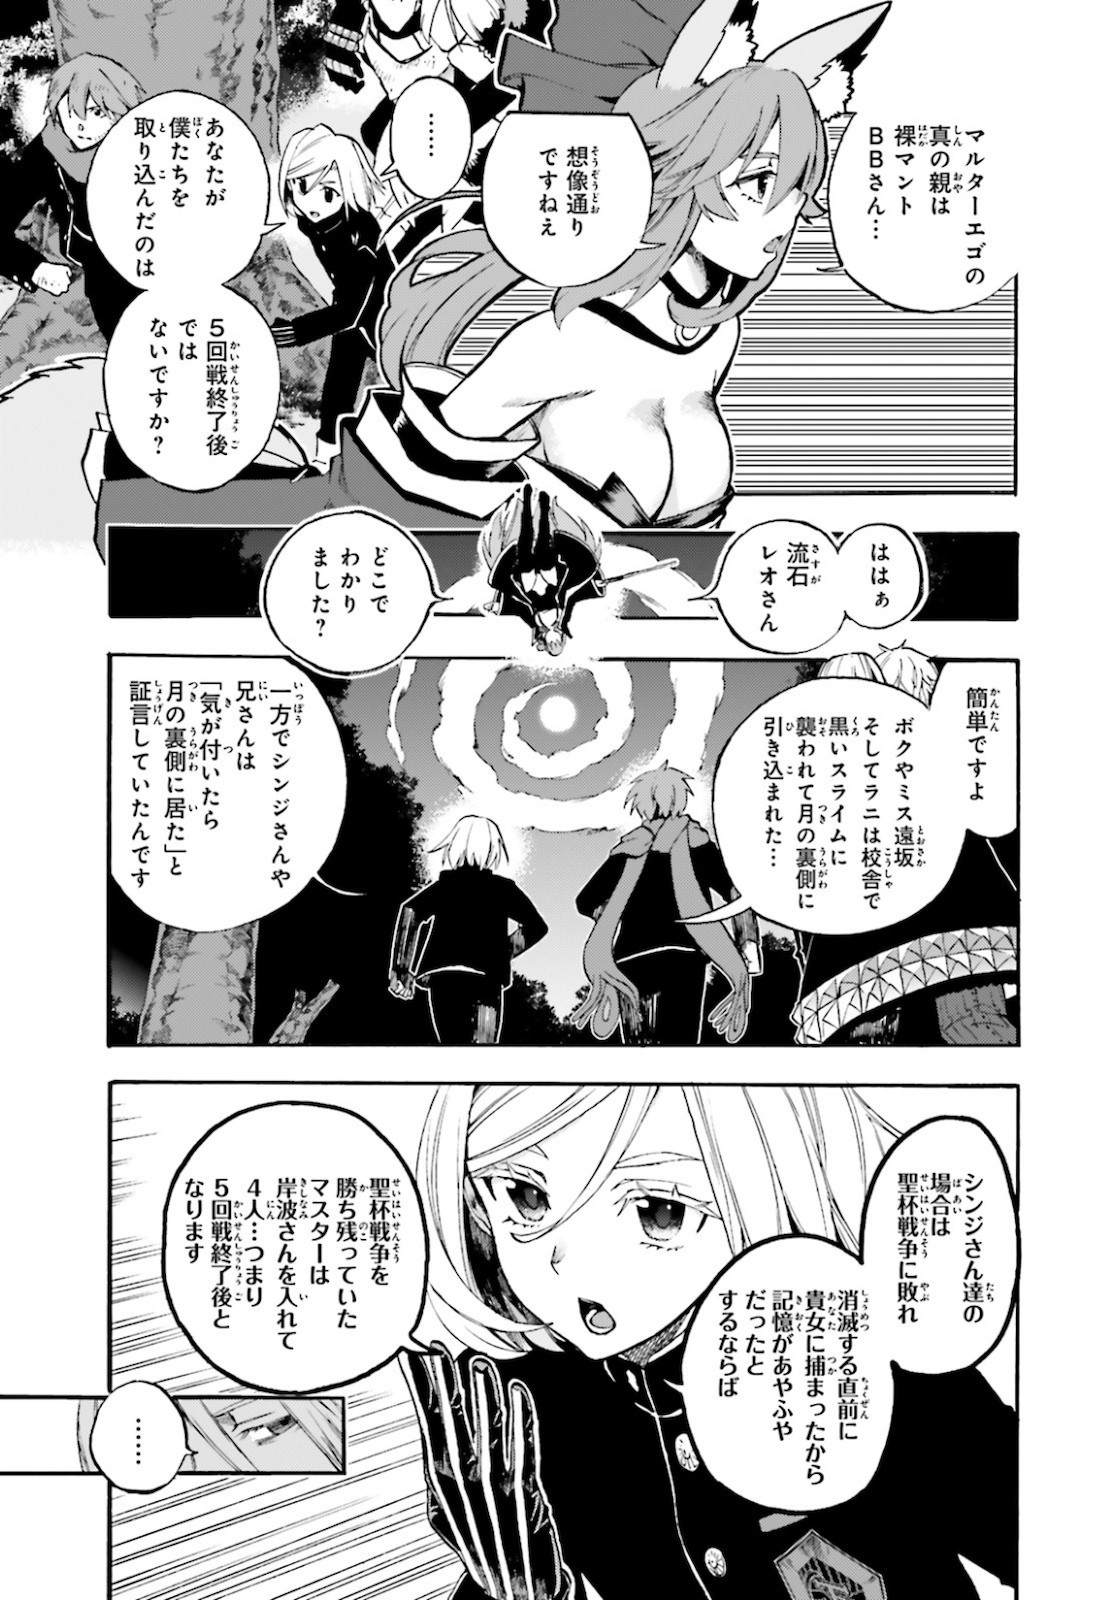 Fate Extra Ccc Fox Tail Chapter 64 5 Page 2 Raw Sen Manga